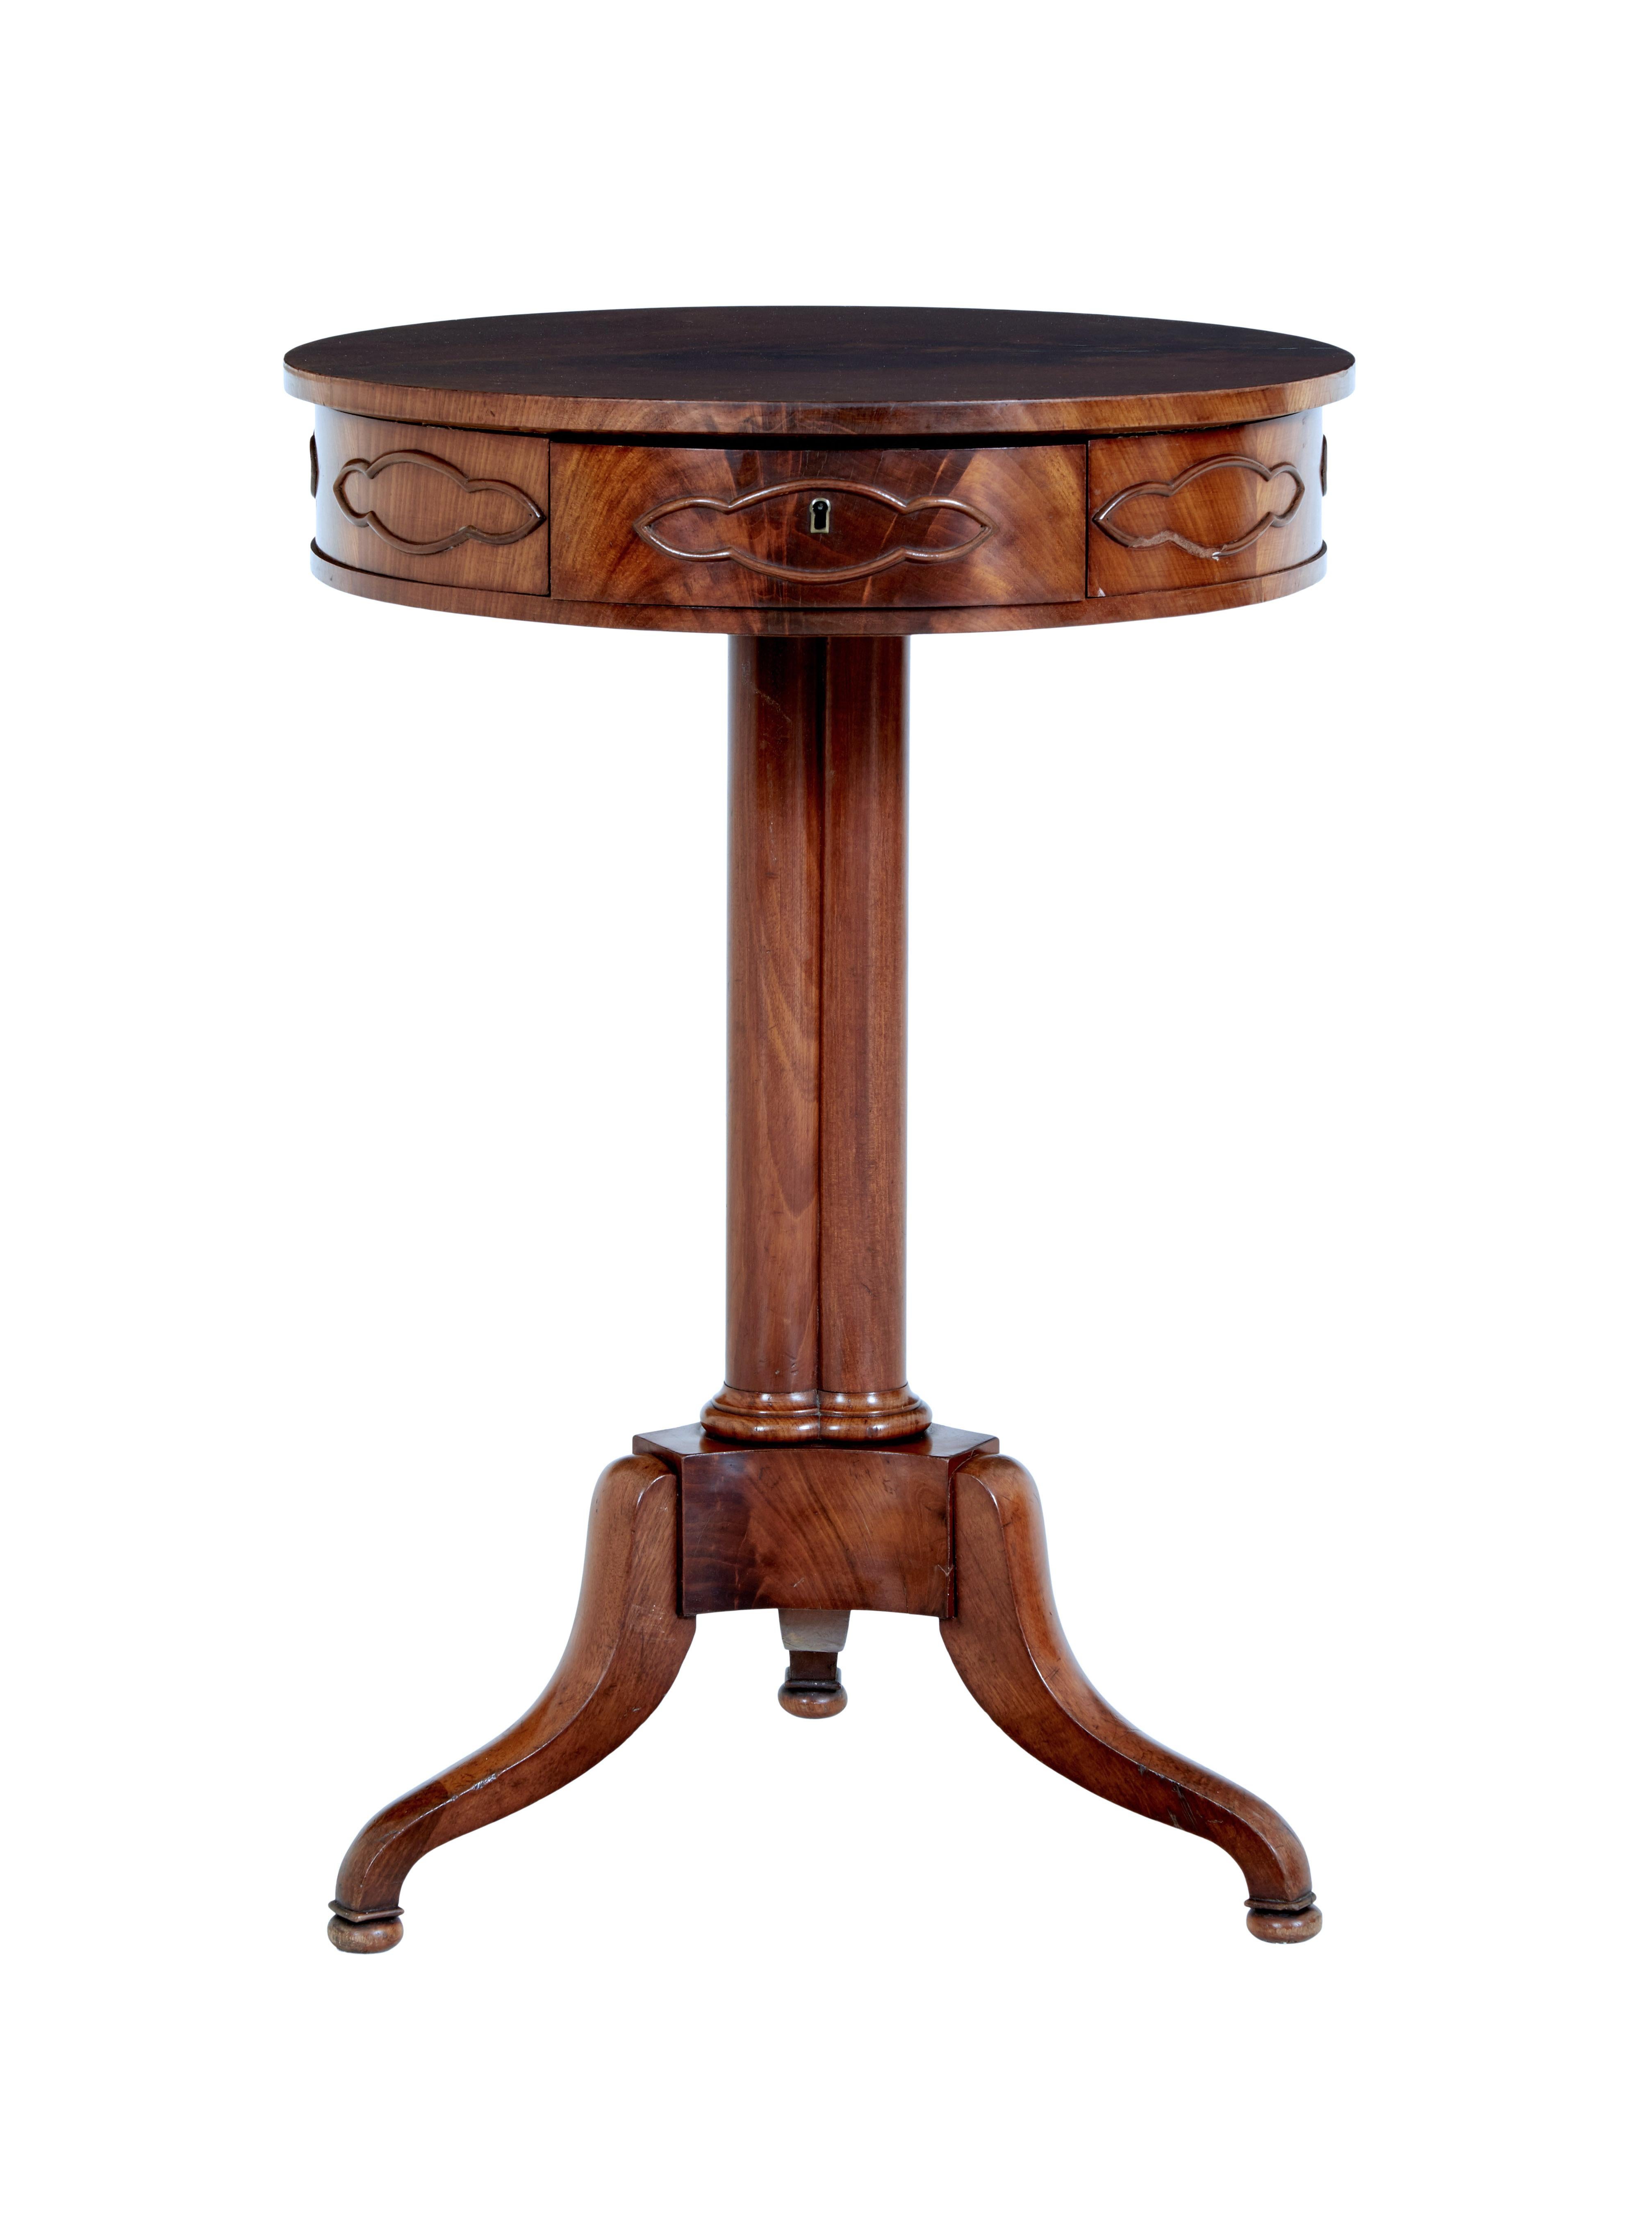 Elegant piece of danish 19th century design circa 1860.
One piece mahogany top, below which is a single fitted drawer, with compartments and hidden pin cushion. Applied detailed molding around the top.
3 column stem, standing on tripod